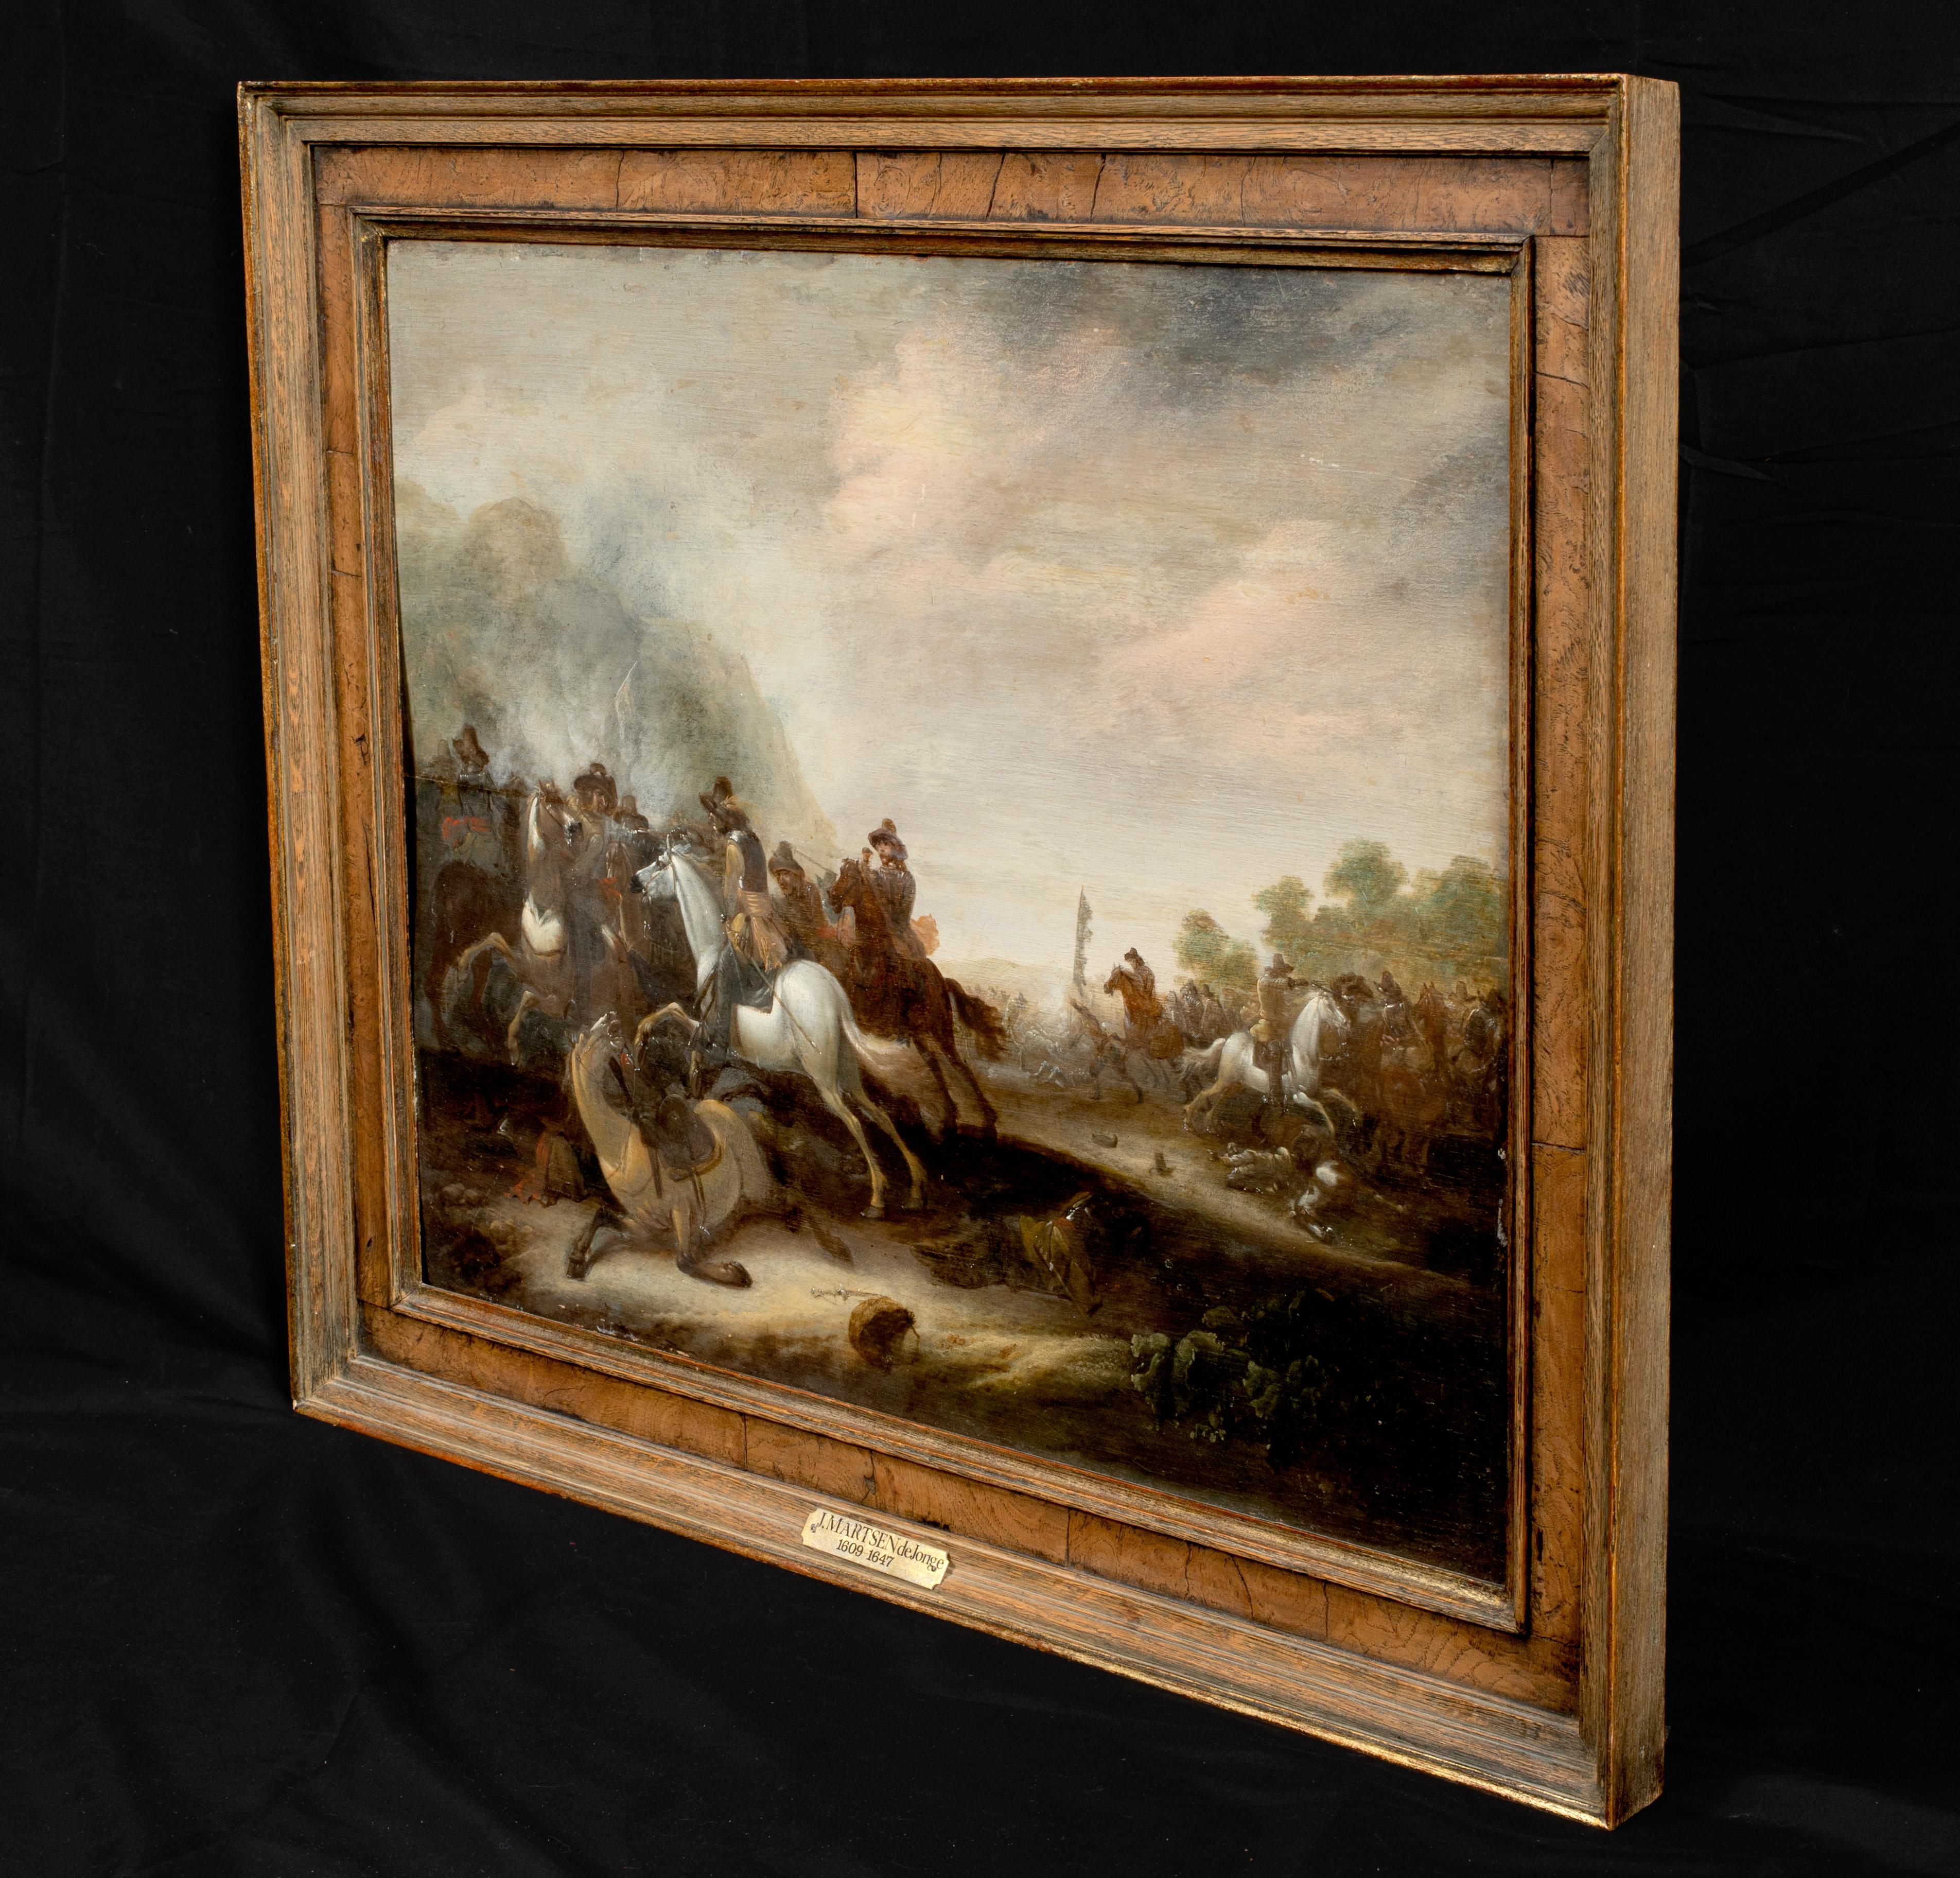 Dutch Cavalry Skirmish, 17th Century 

by Jan Martszen the Younger (1609-1647)

Large 17th Century Dutch Old Master cavalry skirmish in a landscape, oil on panel by Jan Martszen The Younger. Excellent quality and condition example of the artists